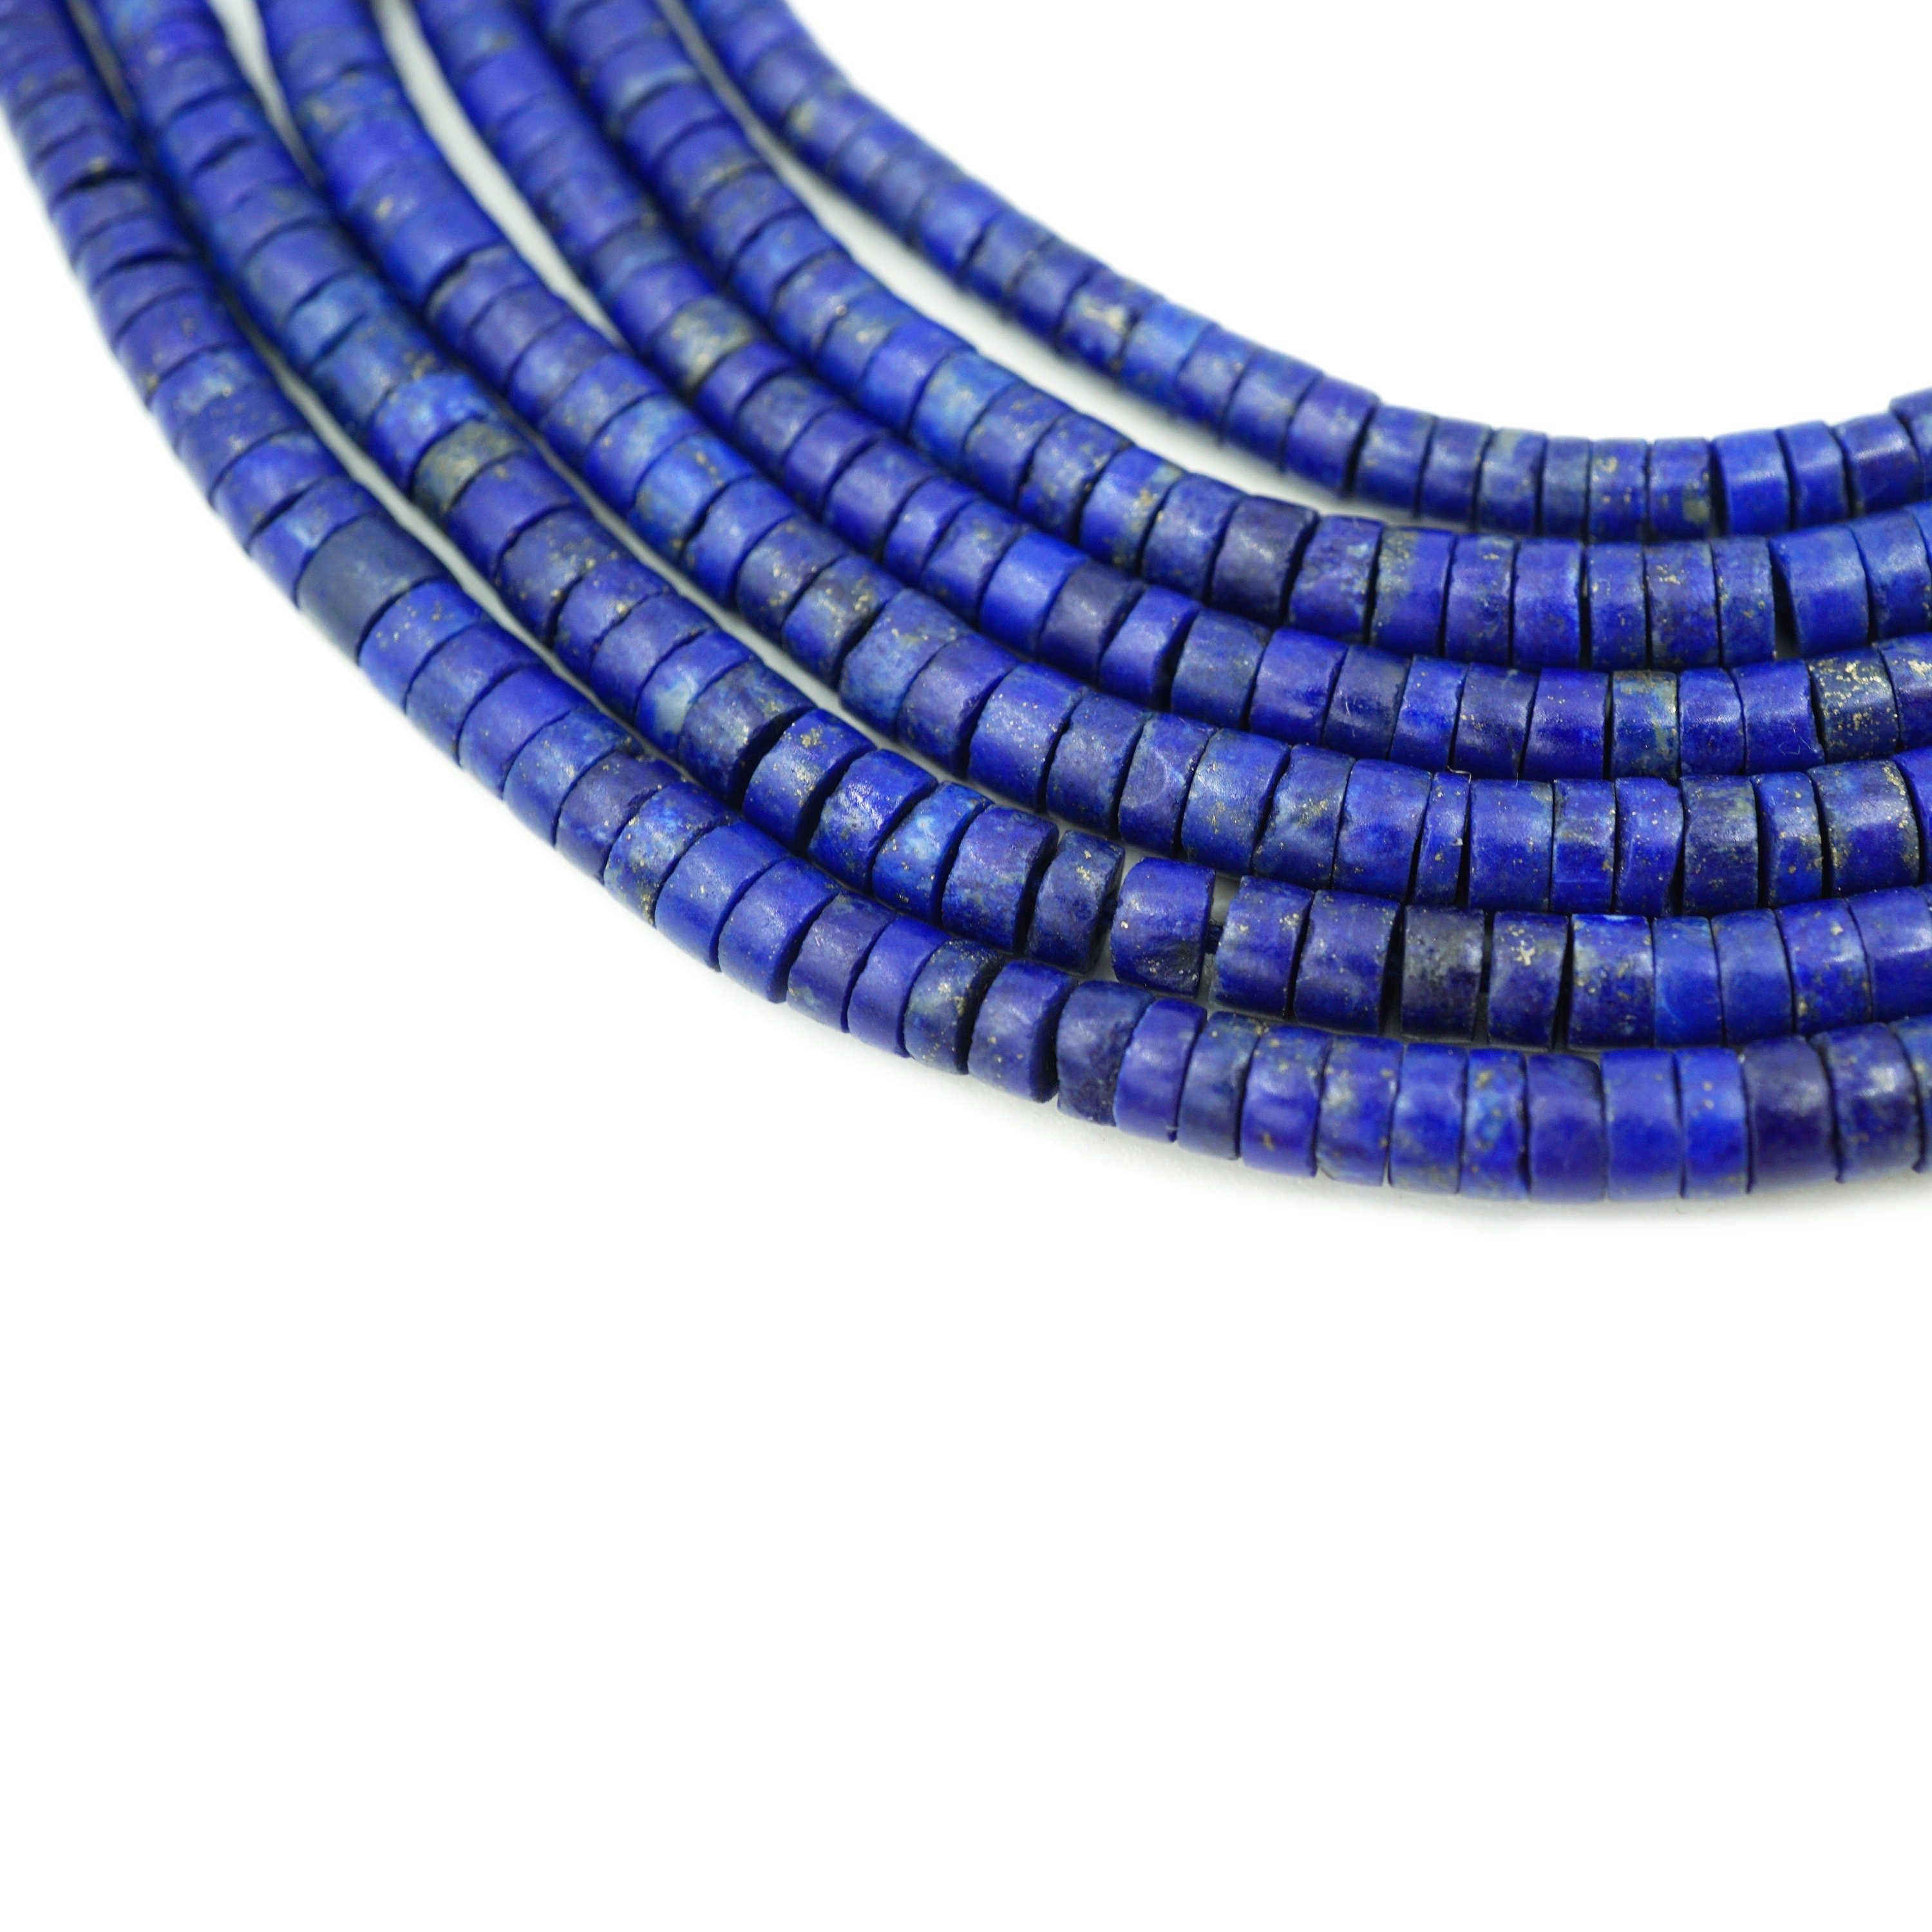 50 Size 6/0 Seed Beads 4x3mm Trica Beads 3 Cut Picasso Seed Beads for  Jewelry Making Opaque Lapis Lazuli Bue With Bronze 6 Inches 